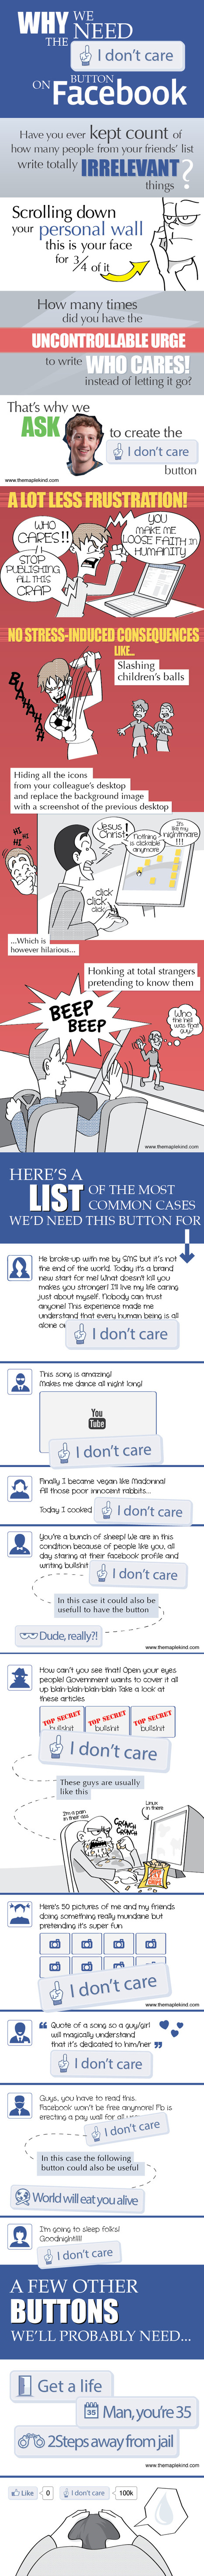 9 Reasons Why Facebook Needs the "I Don't Care" Button - Infographic | Jeffbullas's Blog | Education & Numérique | Scoop.it